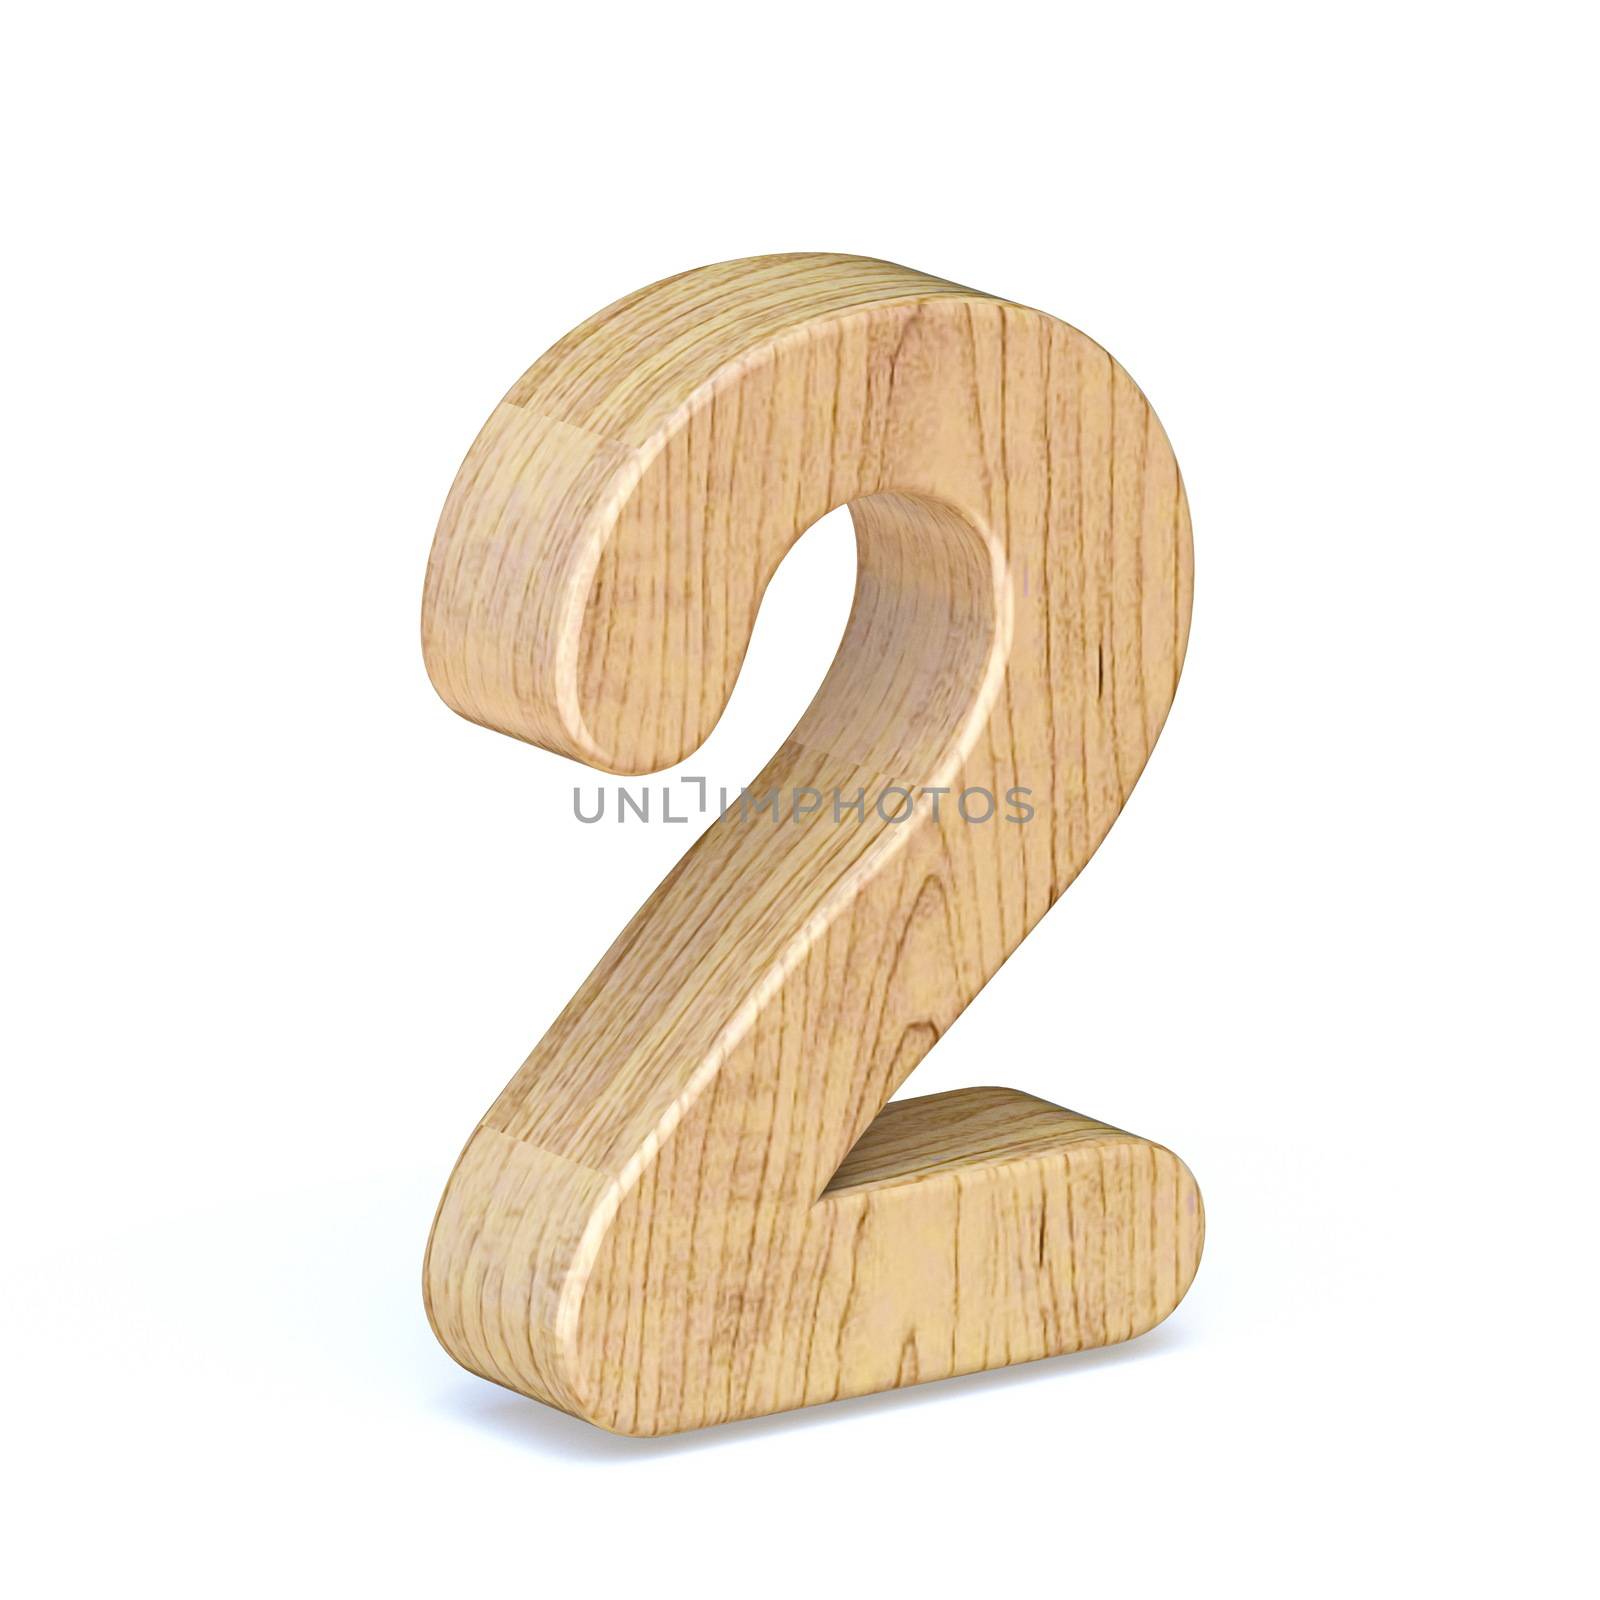 Rounded wooden font Number 2 TWO 3D render illustration isolated on white background